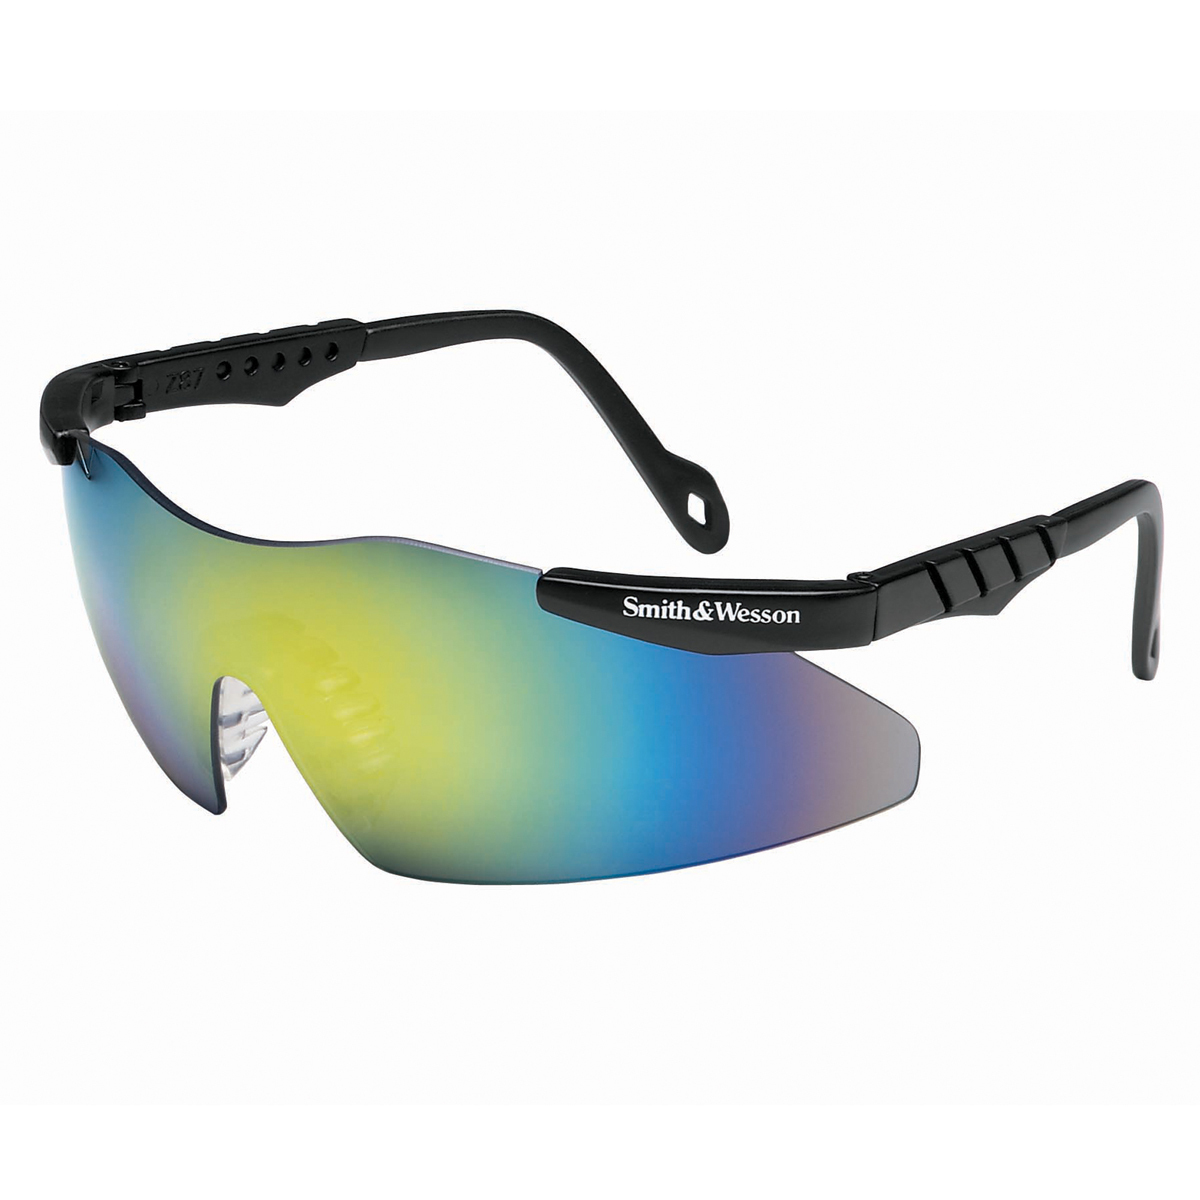 Kimberly-Clark Professional* Smith & Wesson® Magnum® 3G Black Safety Glasses With Metallic Rainbow Mirror/Hard Coat Lens (Availa